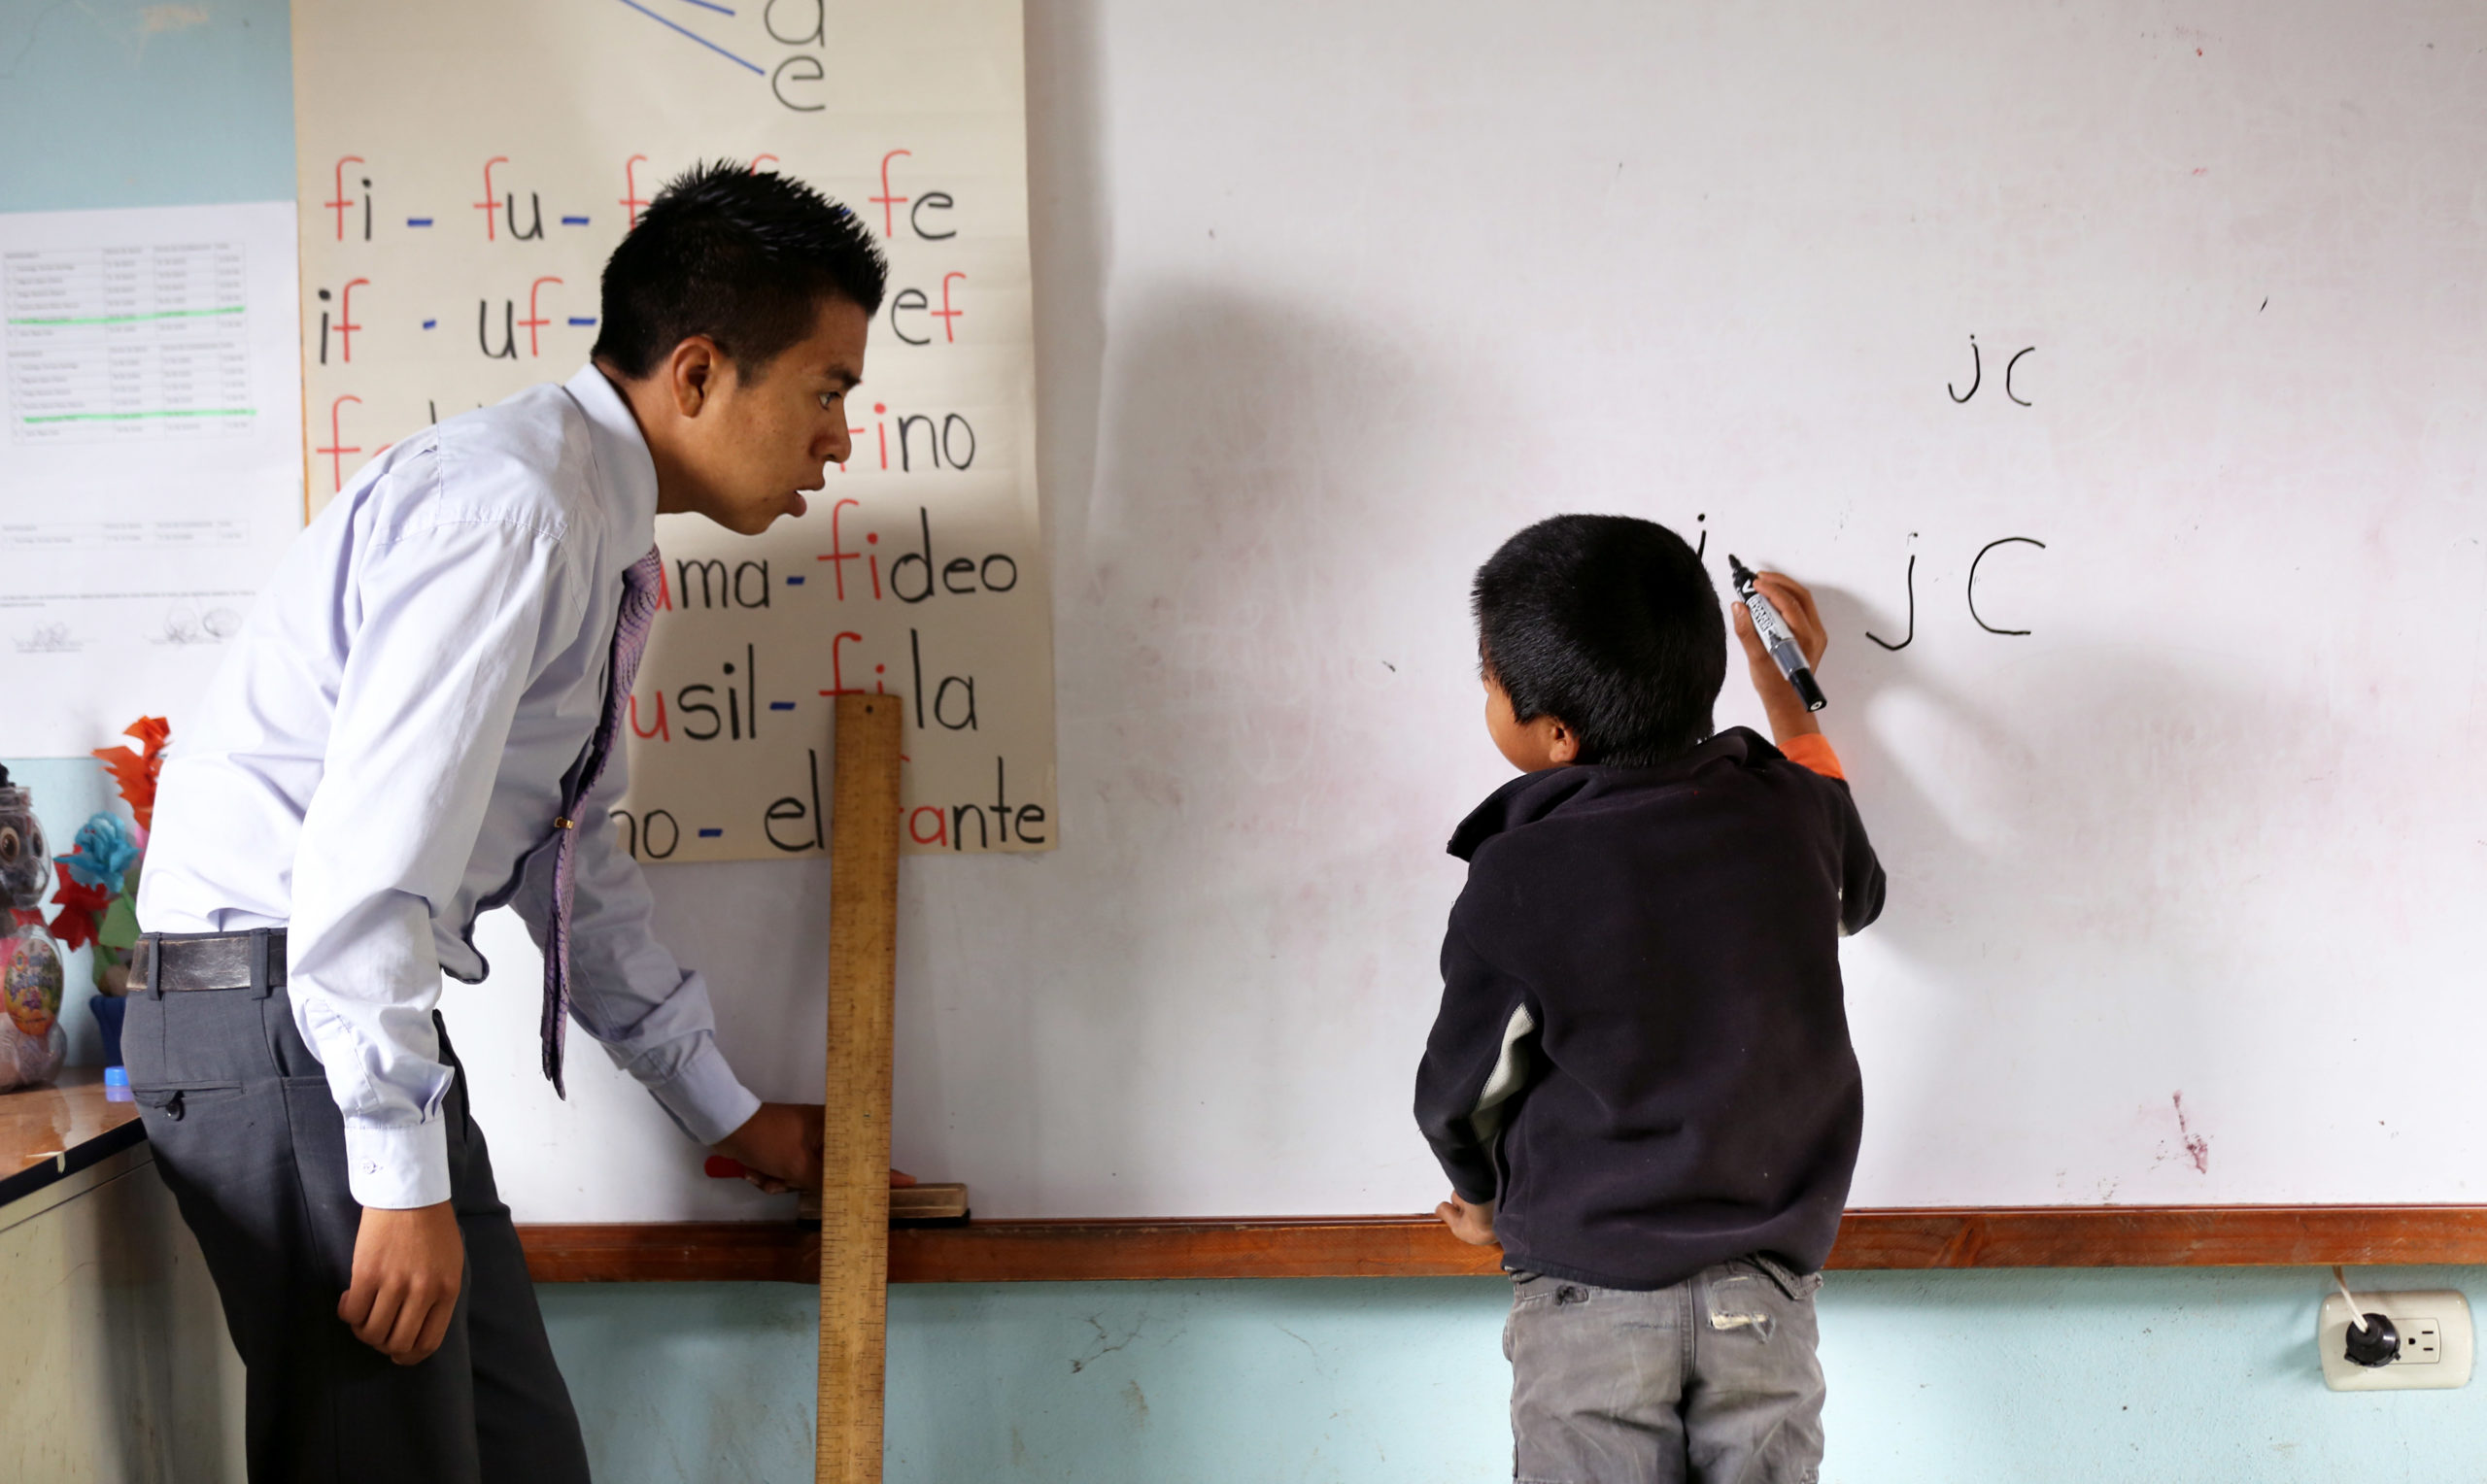 A teacher helps a student write on the white board at the front of a classroom in Guatemala.